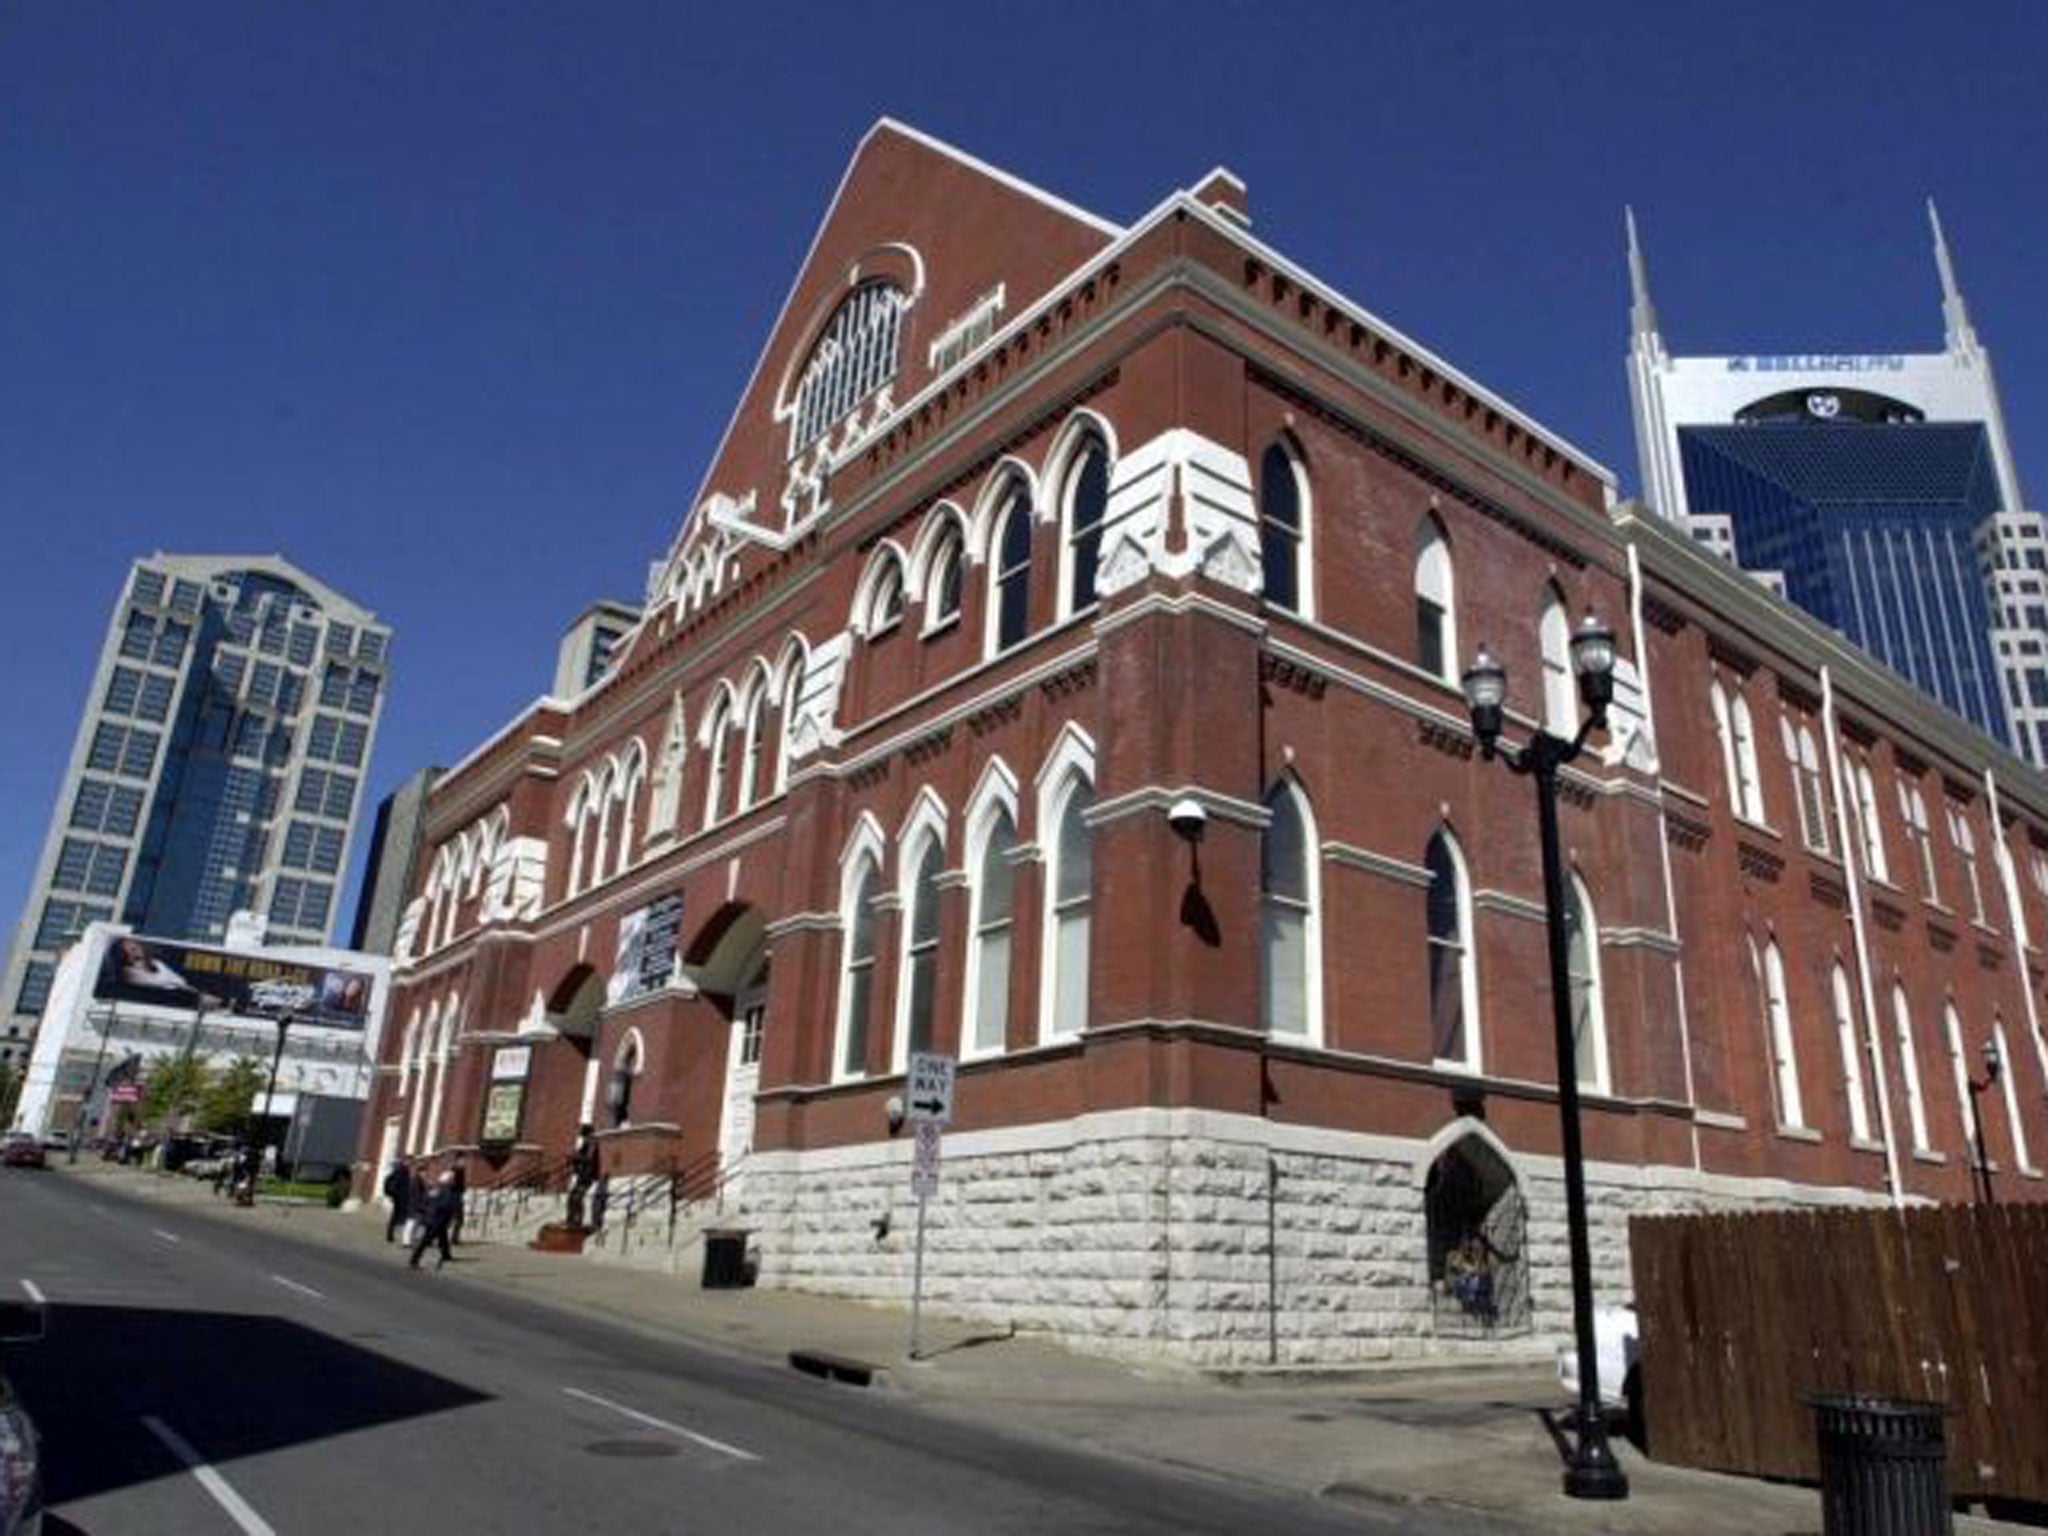 Country life: The Ryman Auditorium has hosted artists such as Hank Williams and Johnny Cash